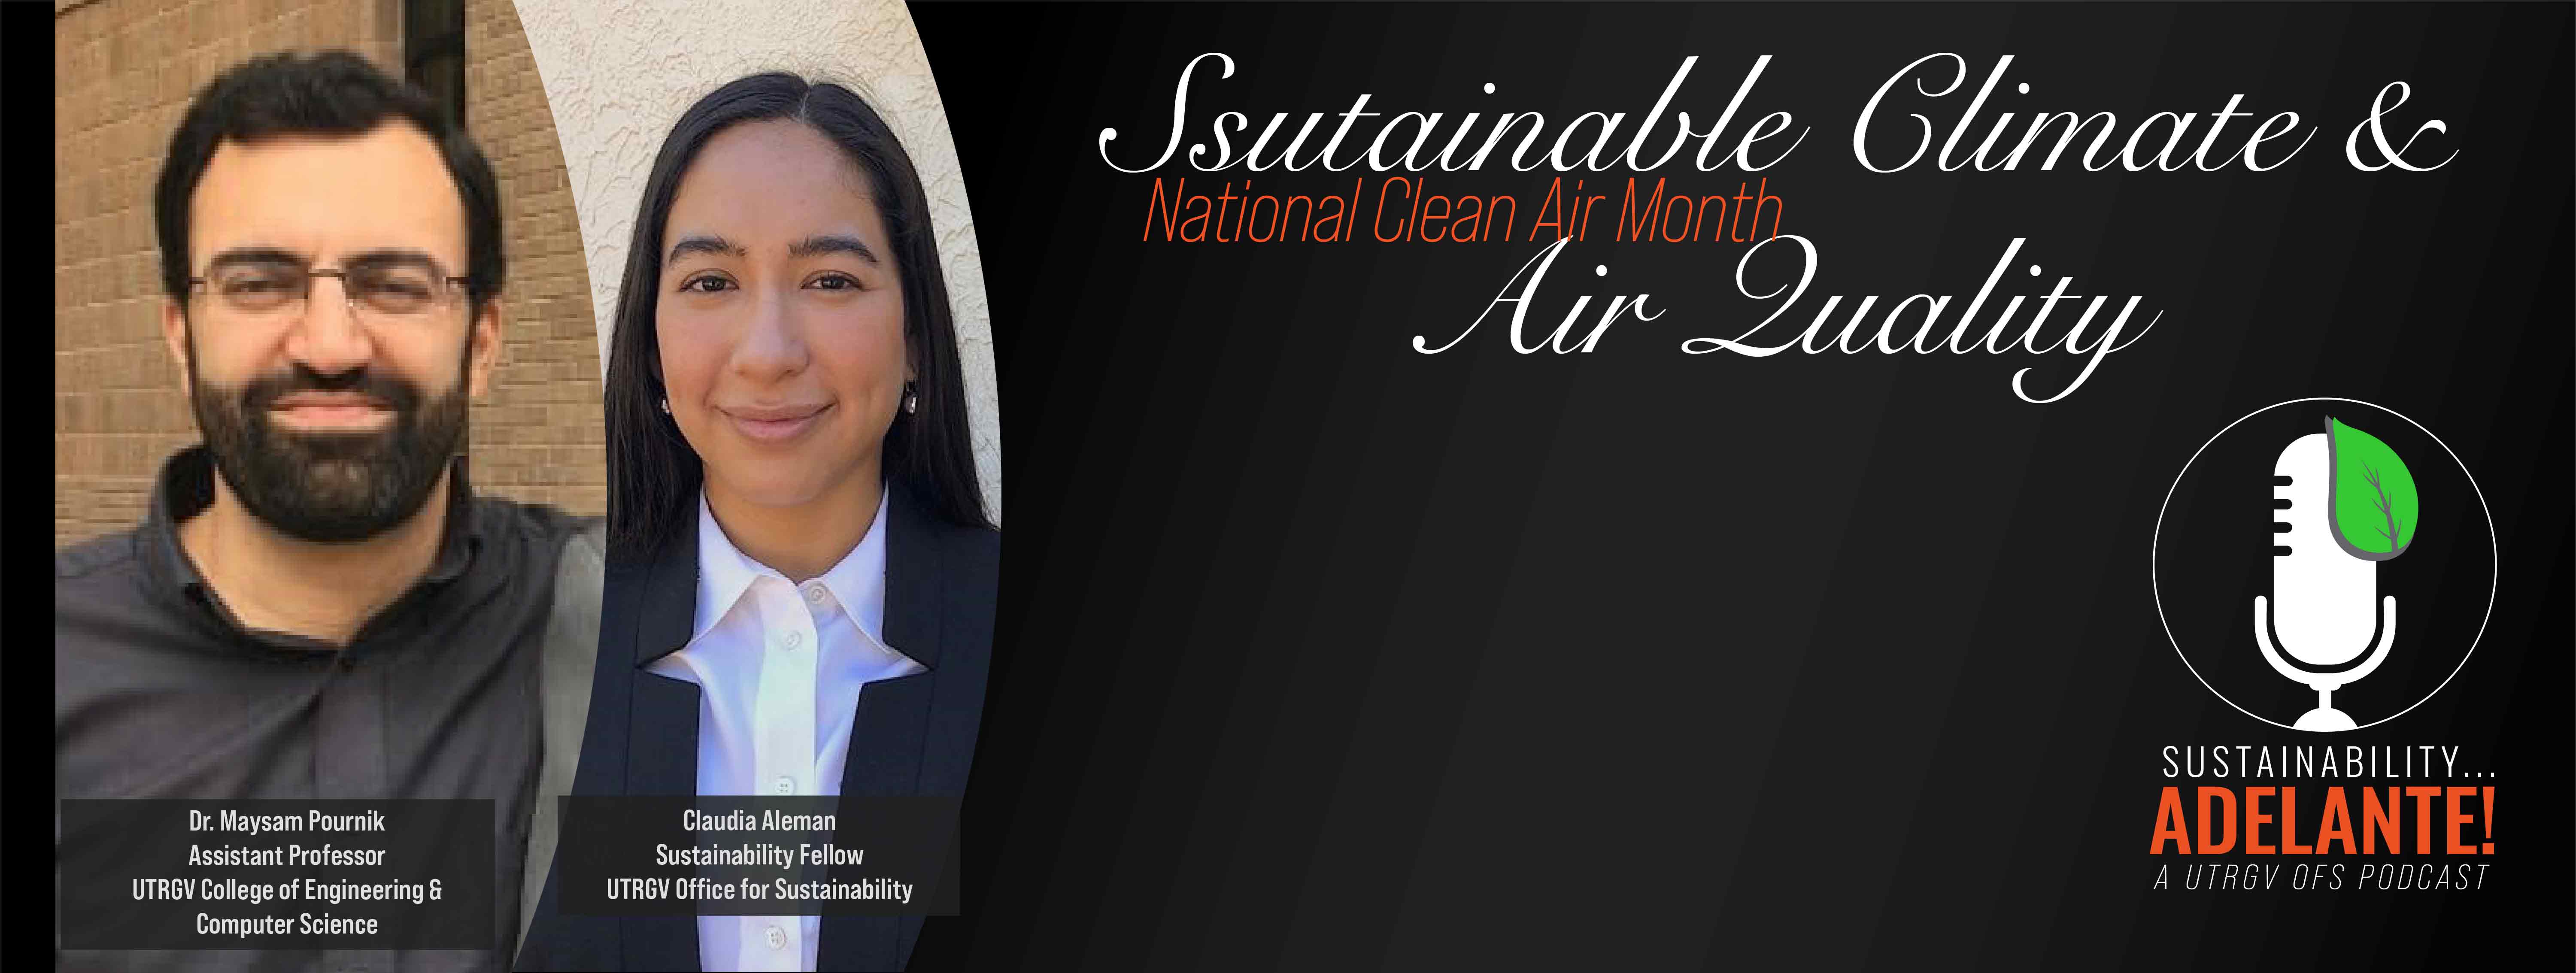 Sustanability Adelante Podcast with Dr. Maysam Pounrik and Ms. Claudia Aleman on Climate and Air Quality